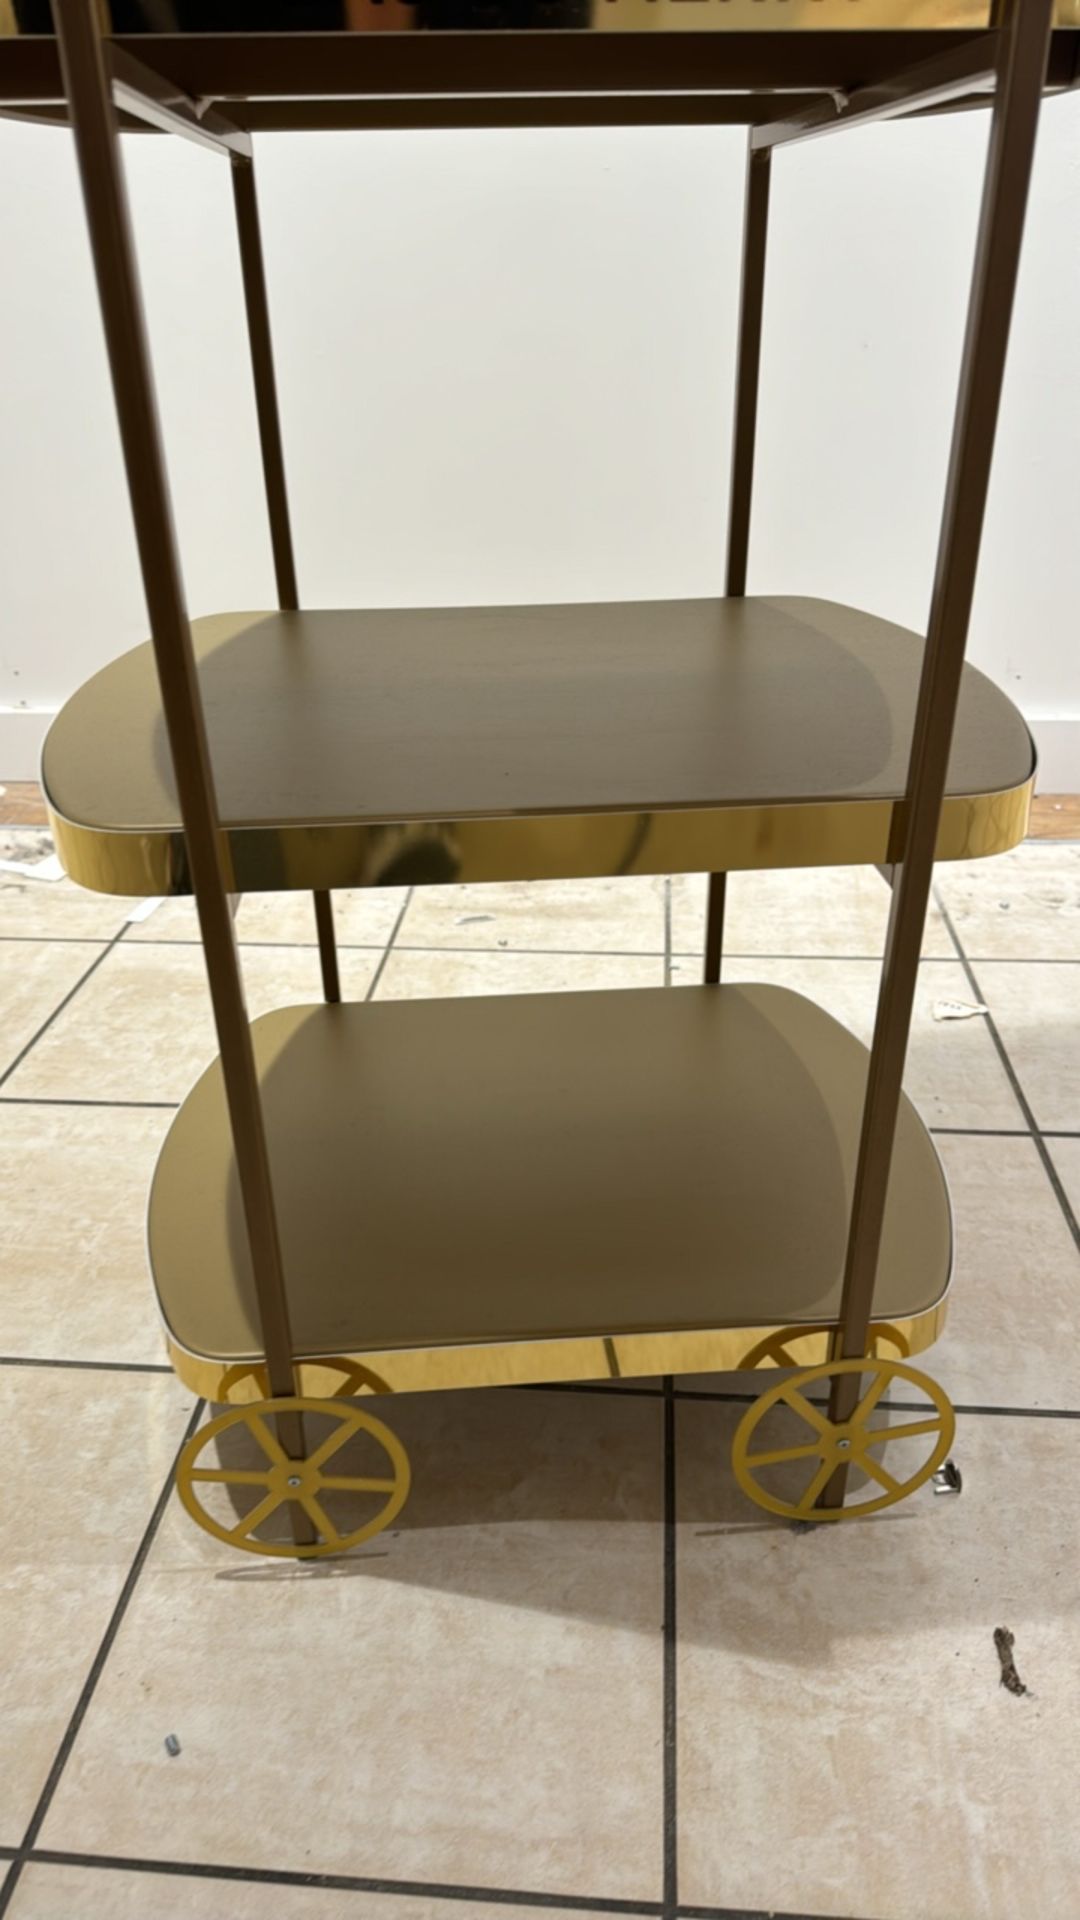 Marc Jacobs Display Trolley Stand - Image 3 of 4